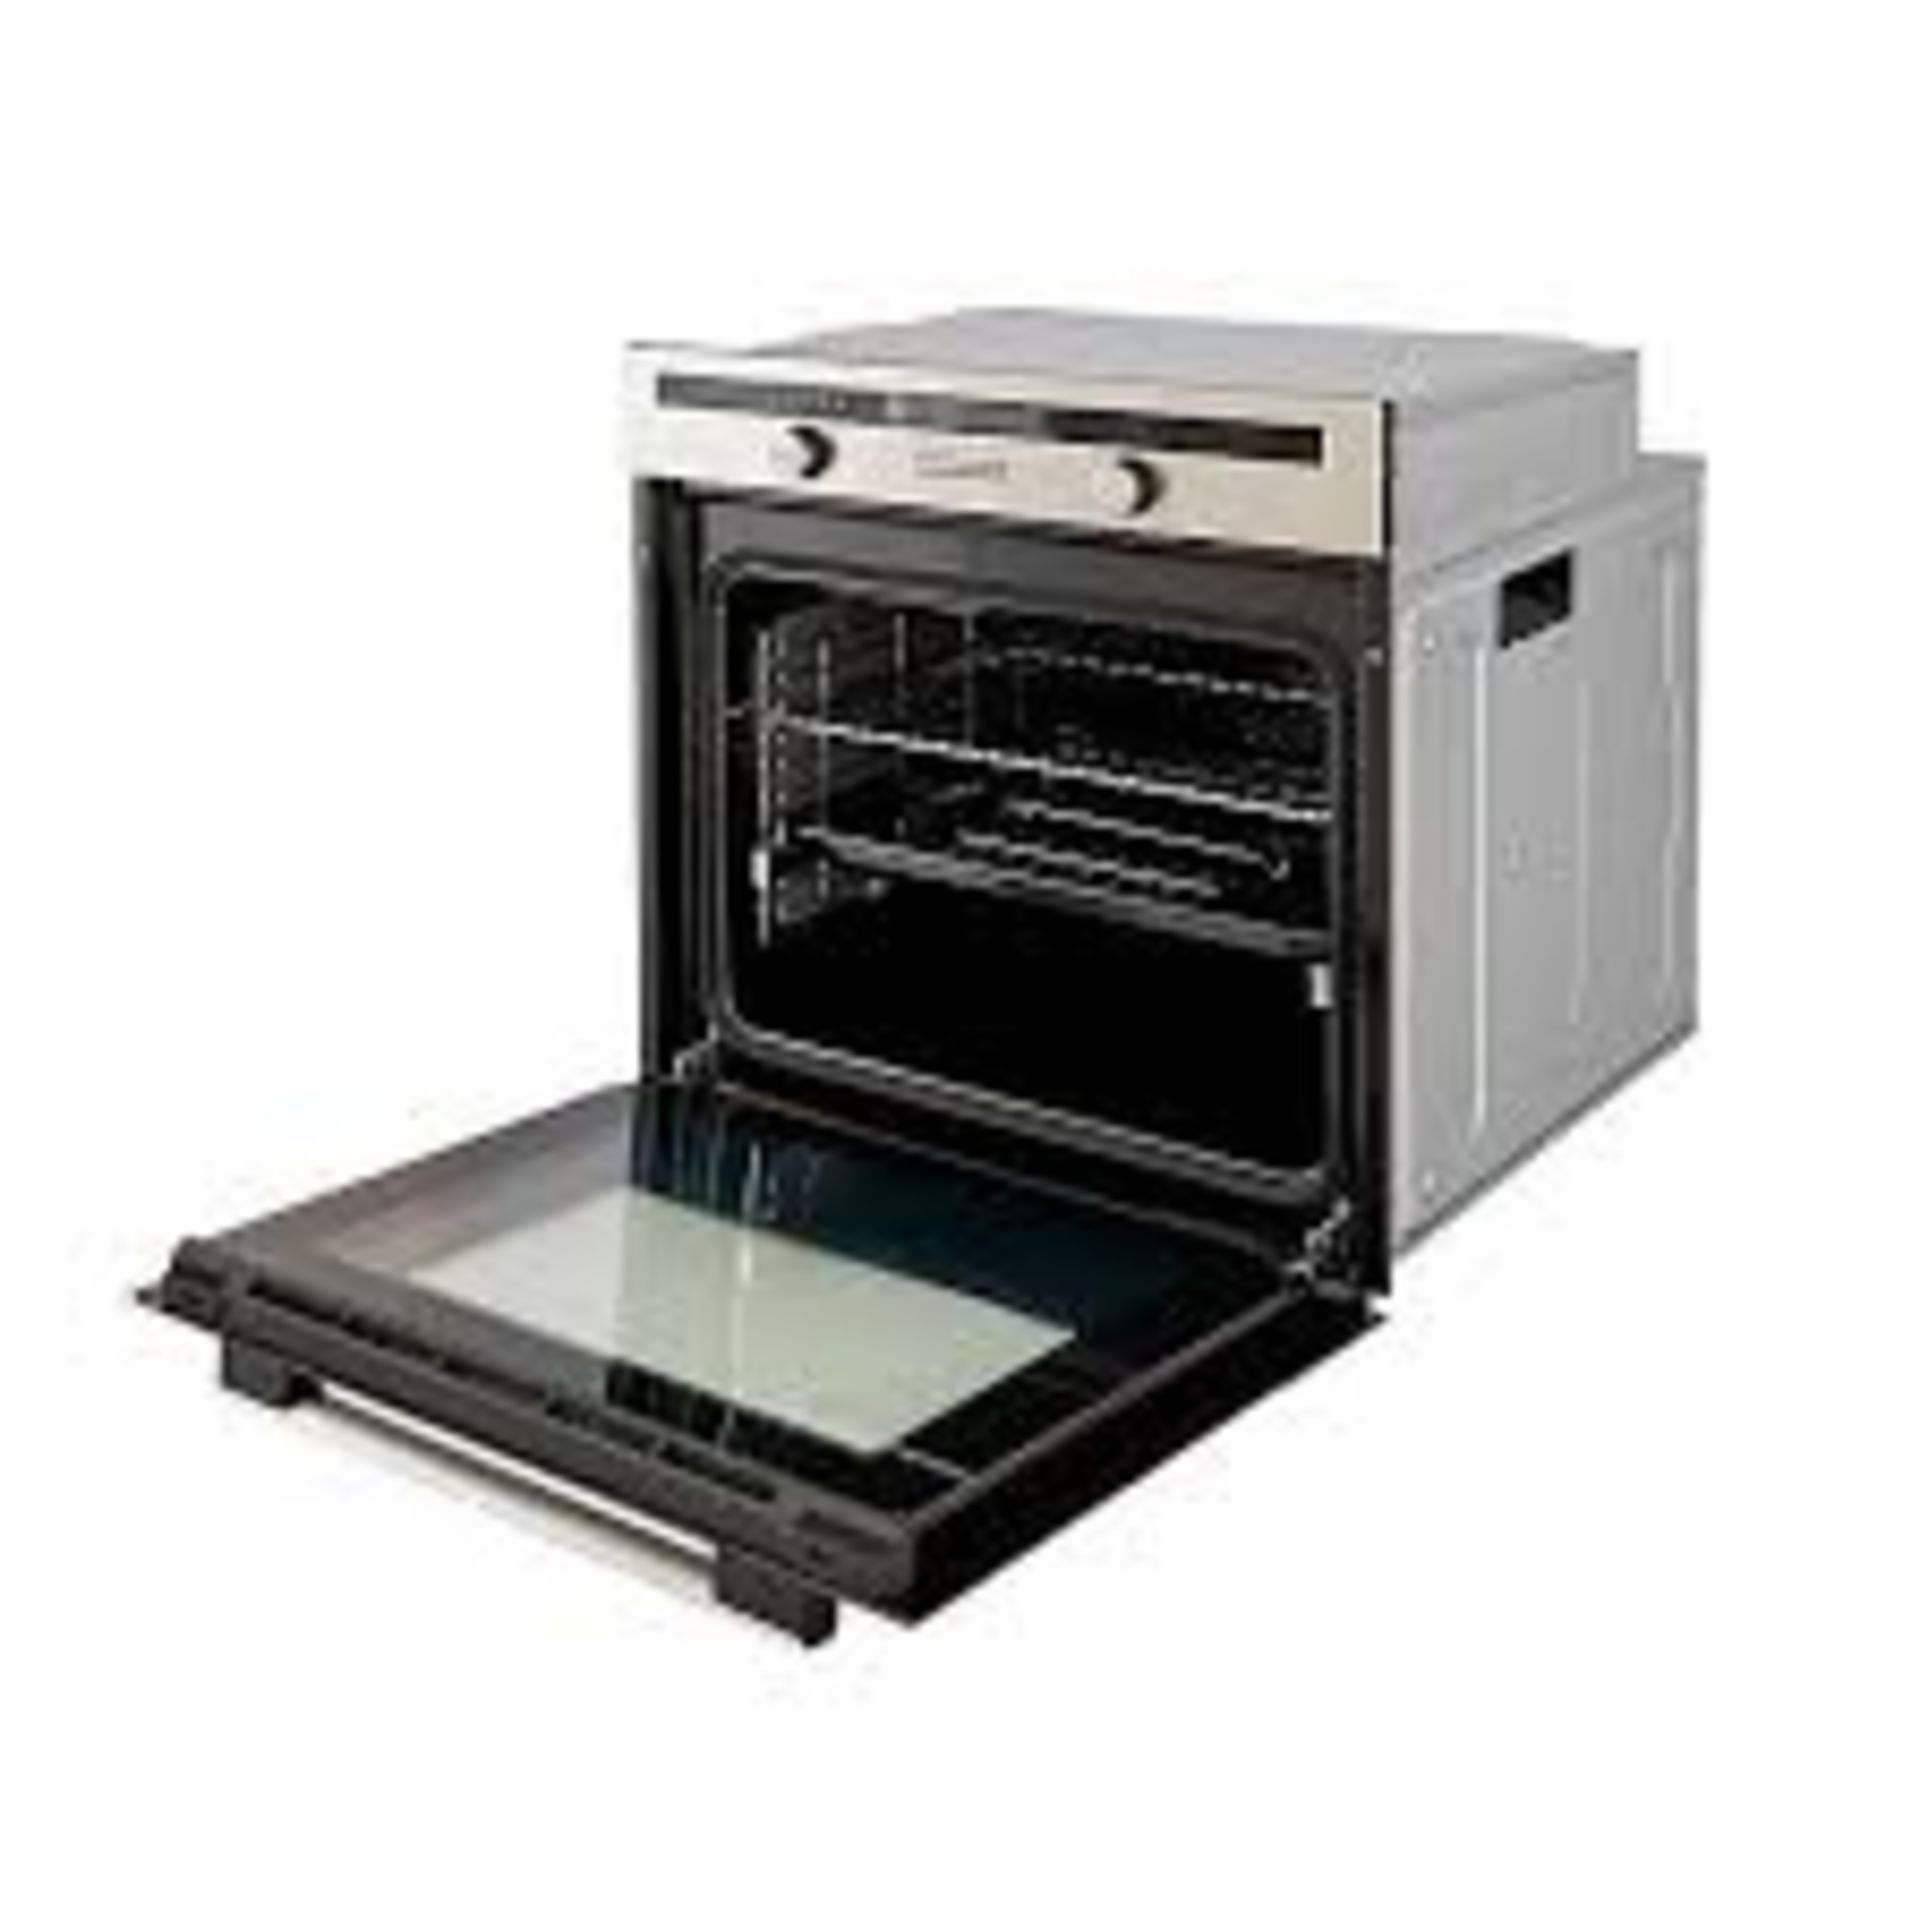 Cooke & Lewis CLMFSTa Built-in Single Multifunction Oven . - R9BW. This multifunctional oven is - Image 2 of 2